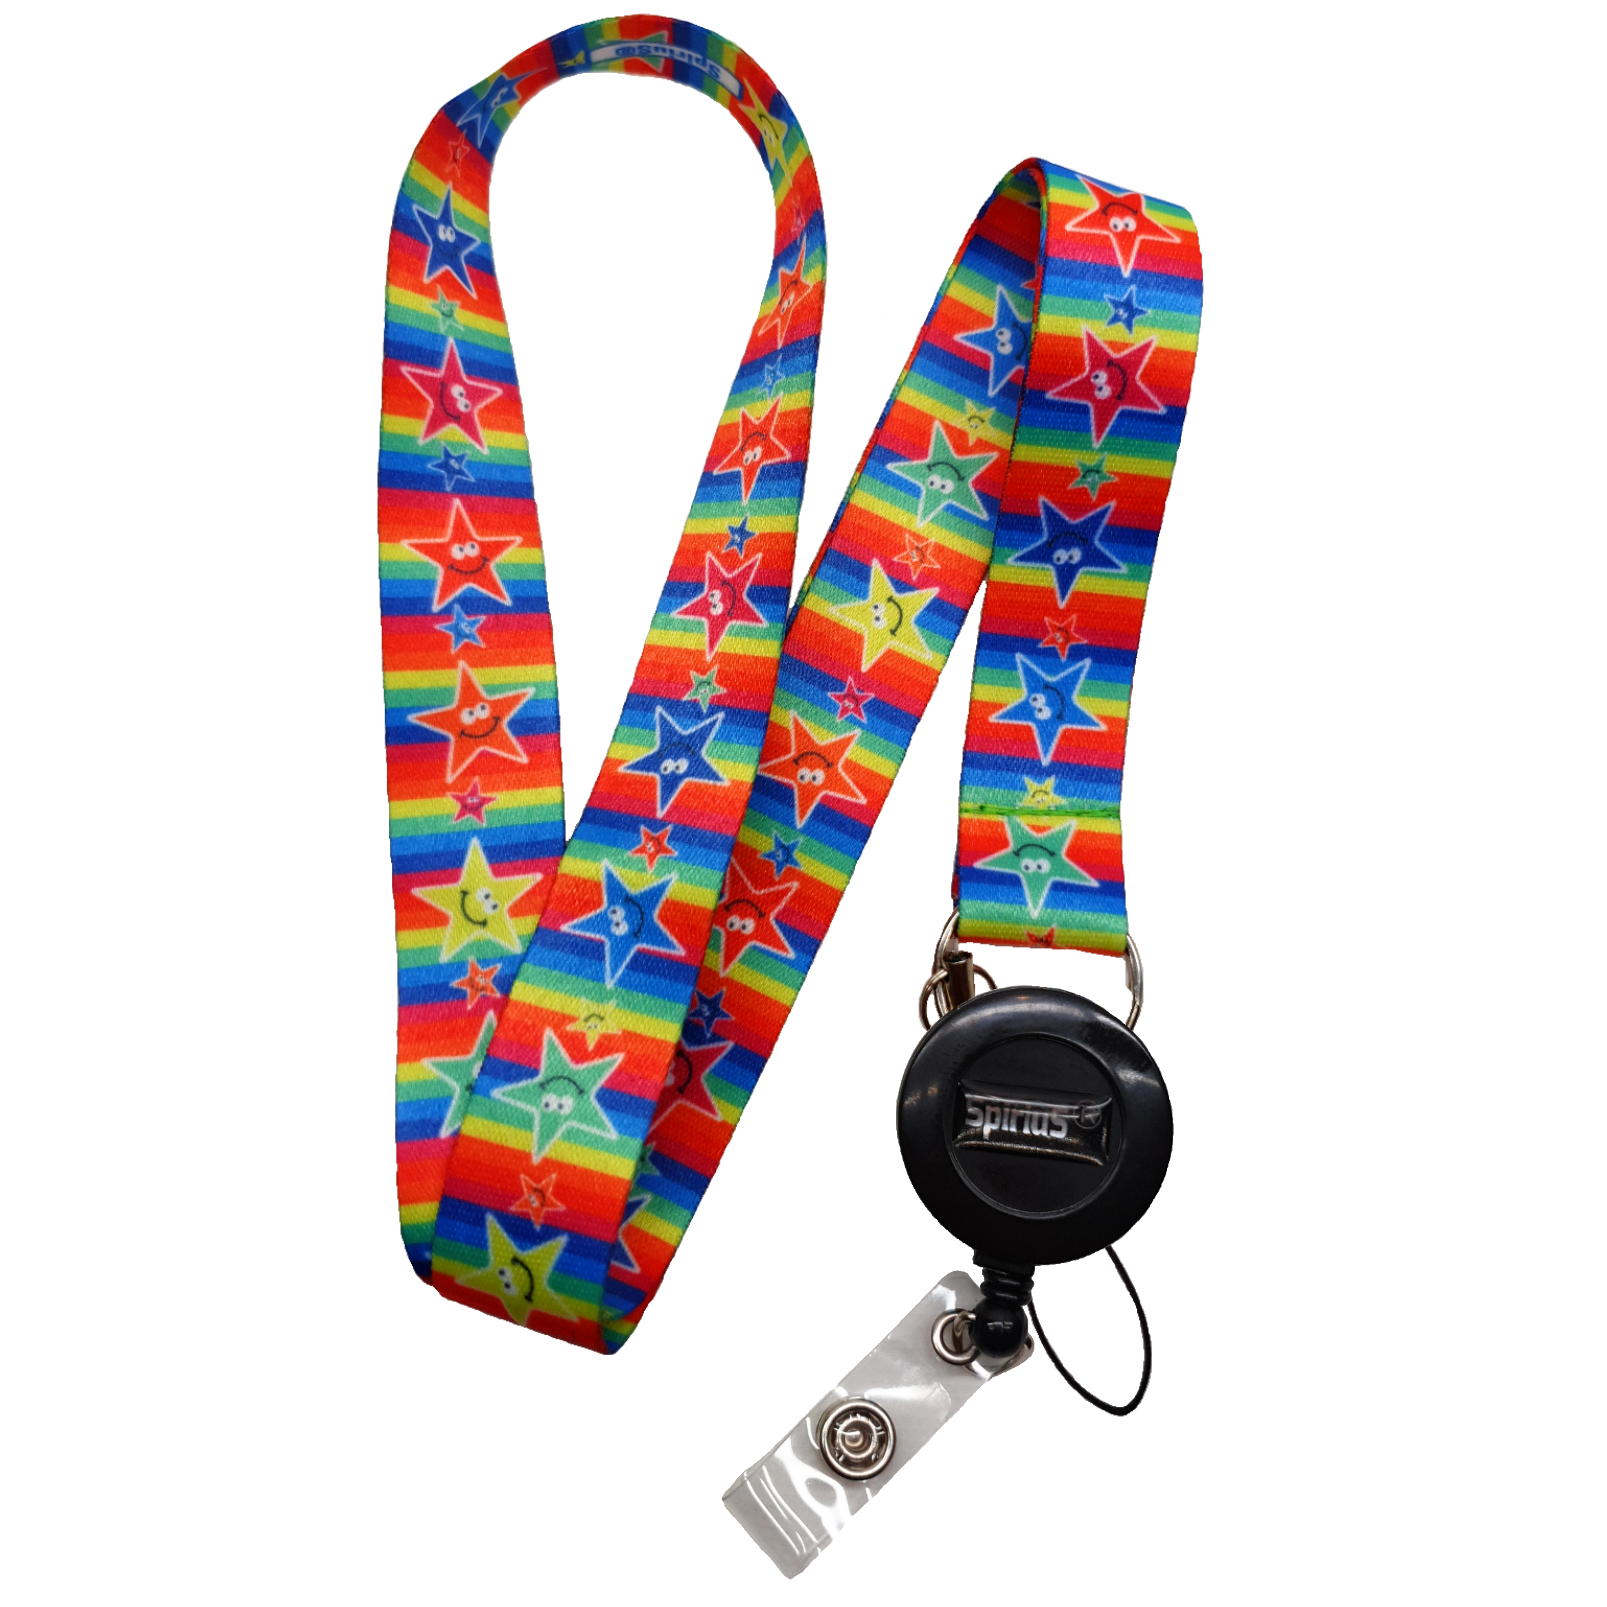 Lanyard Neck strap for ID card badge Holder with retractable reel